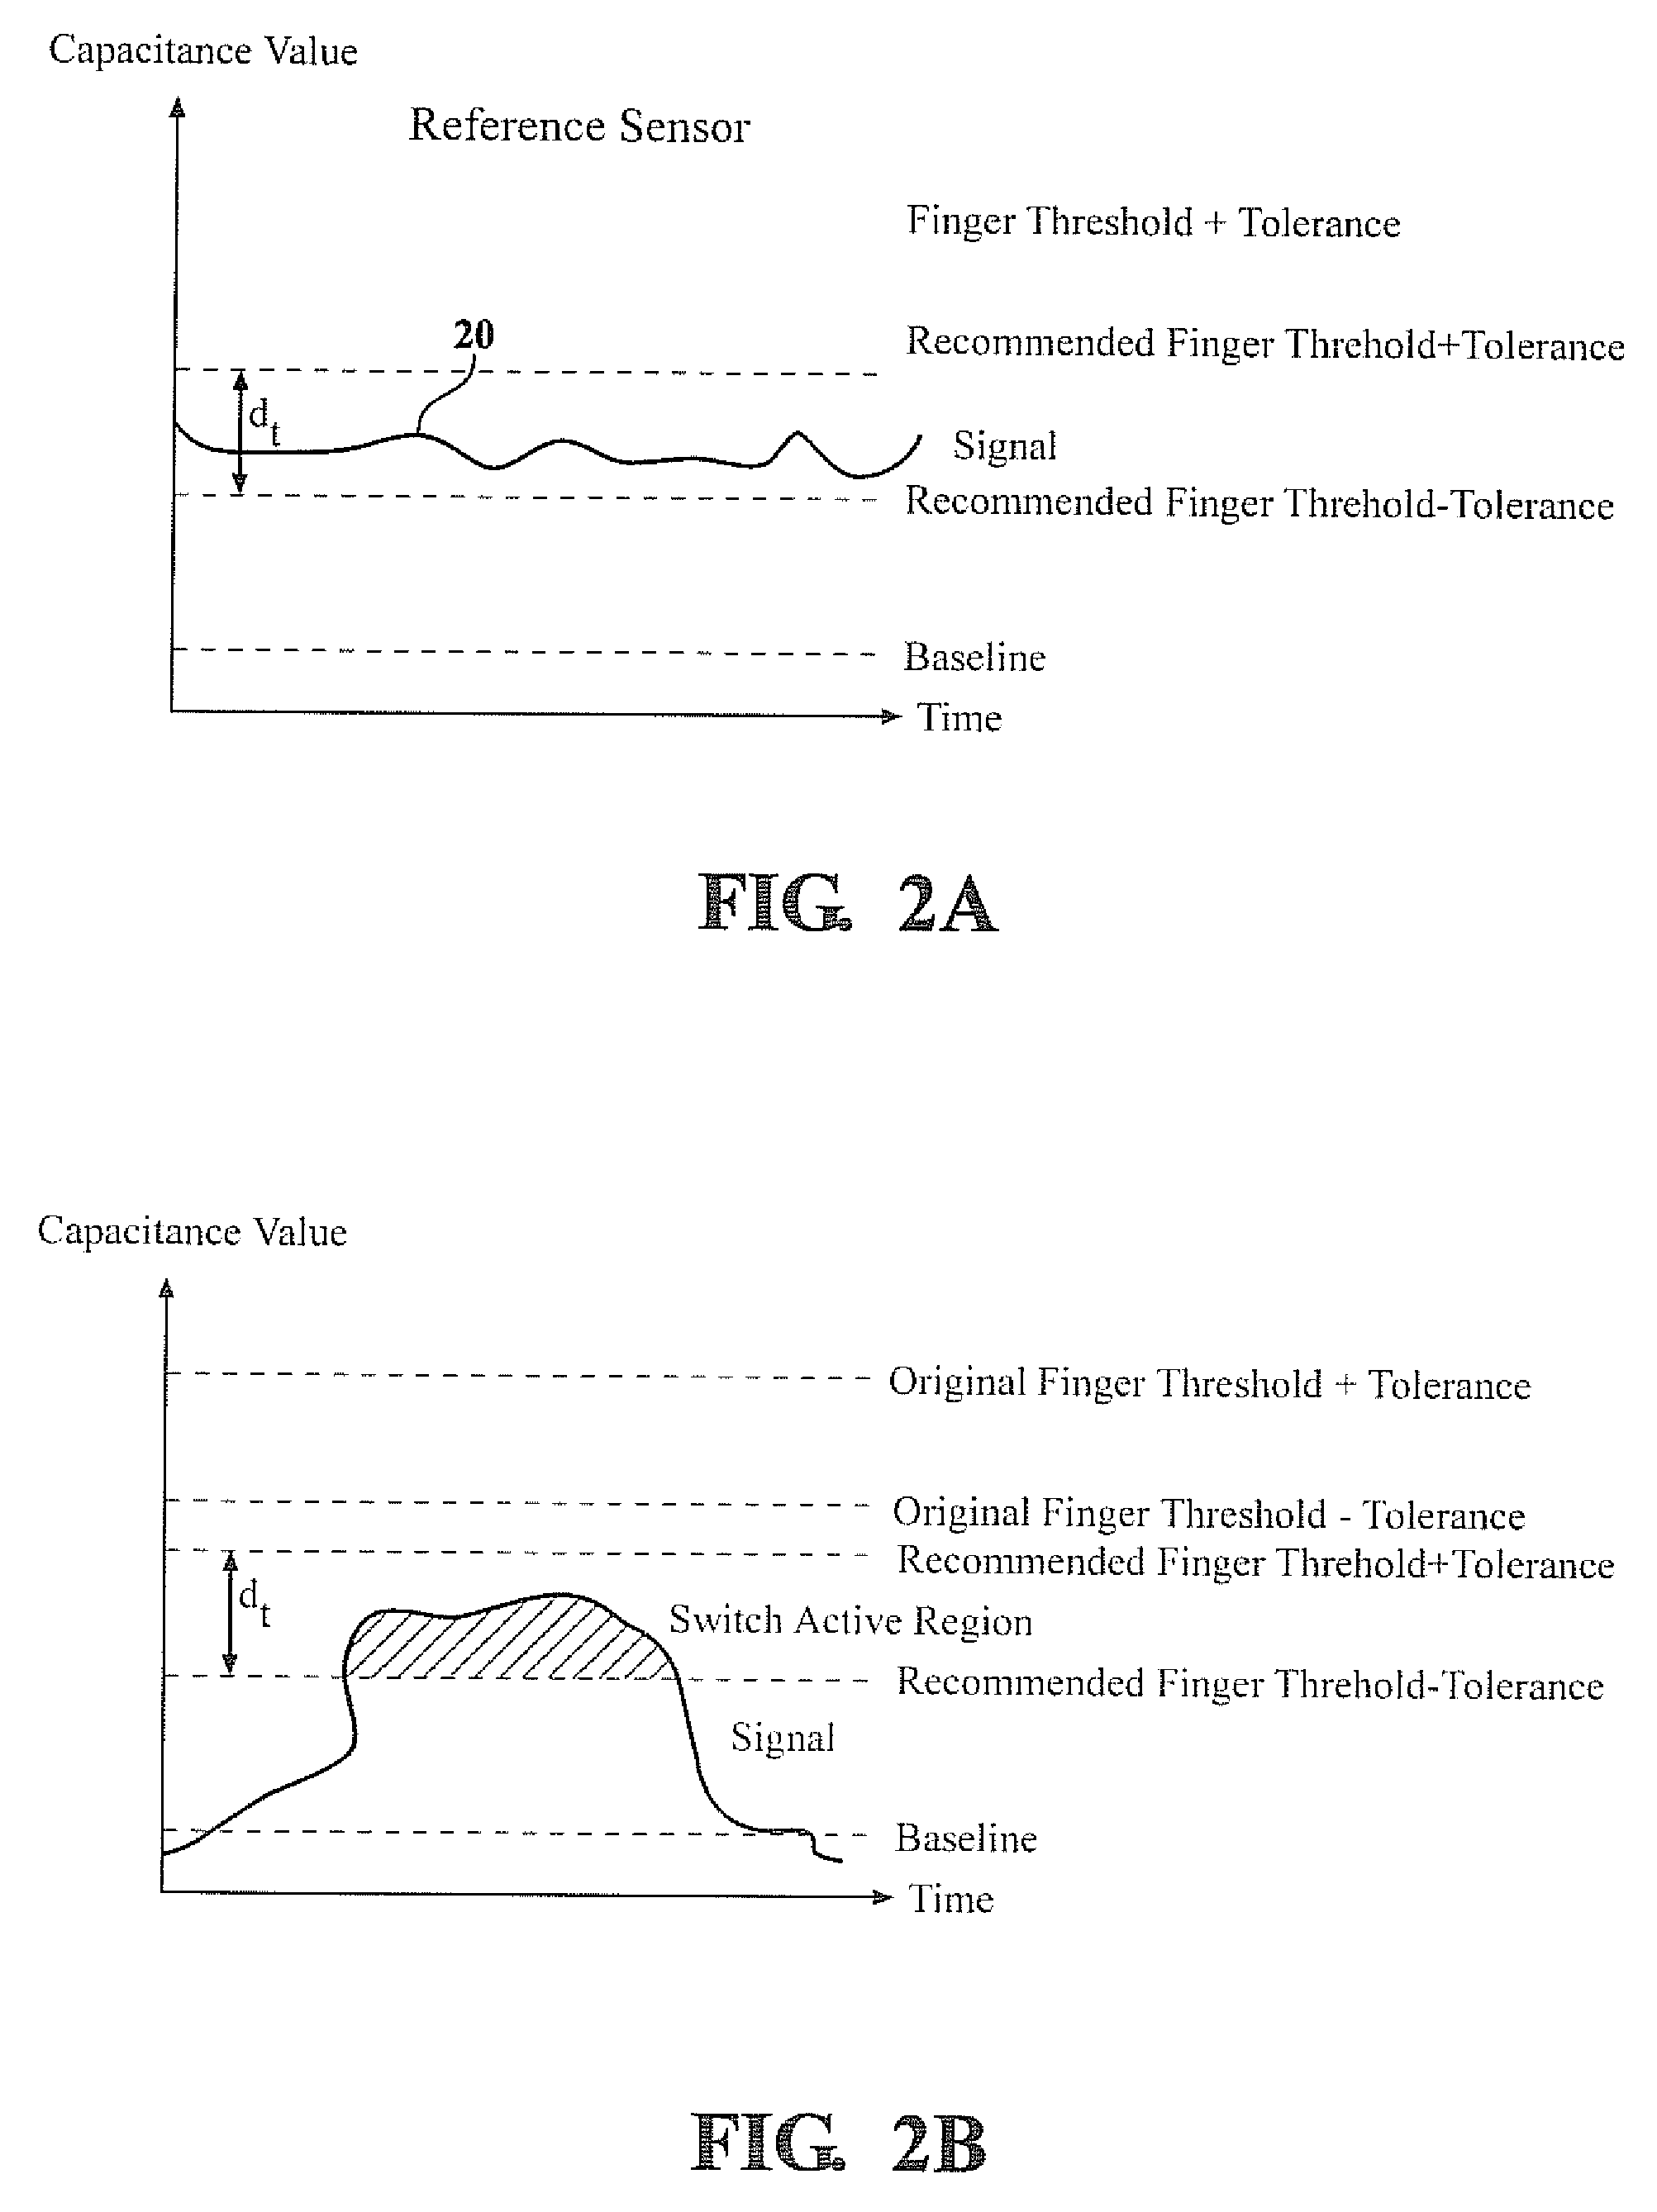 Capacitive switch reference method